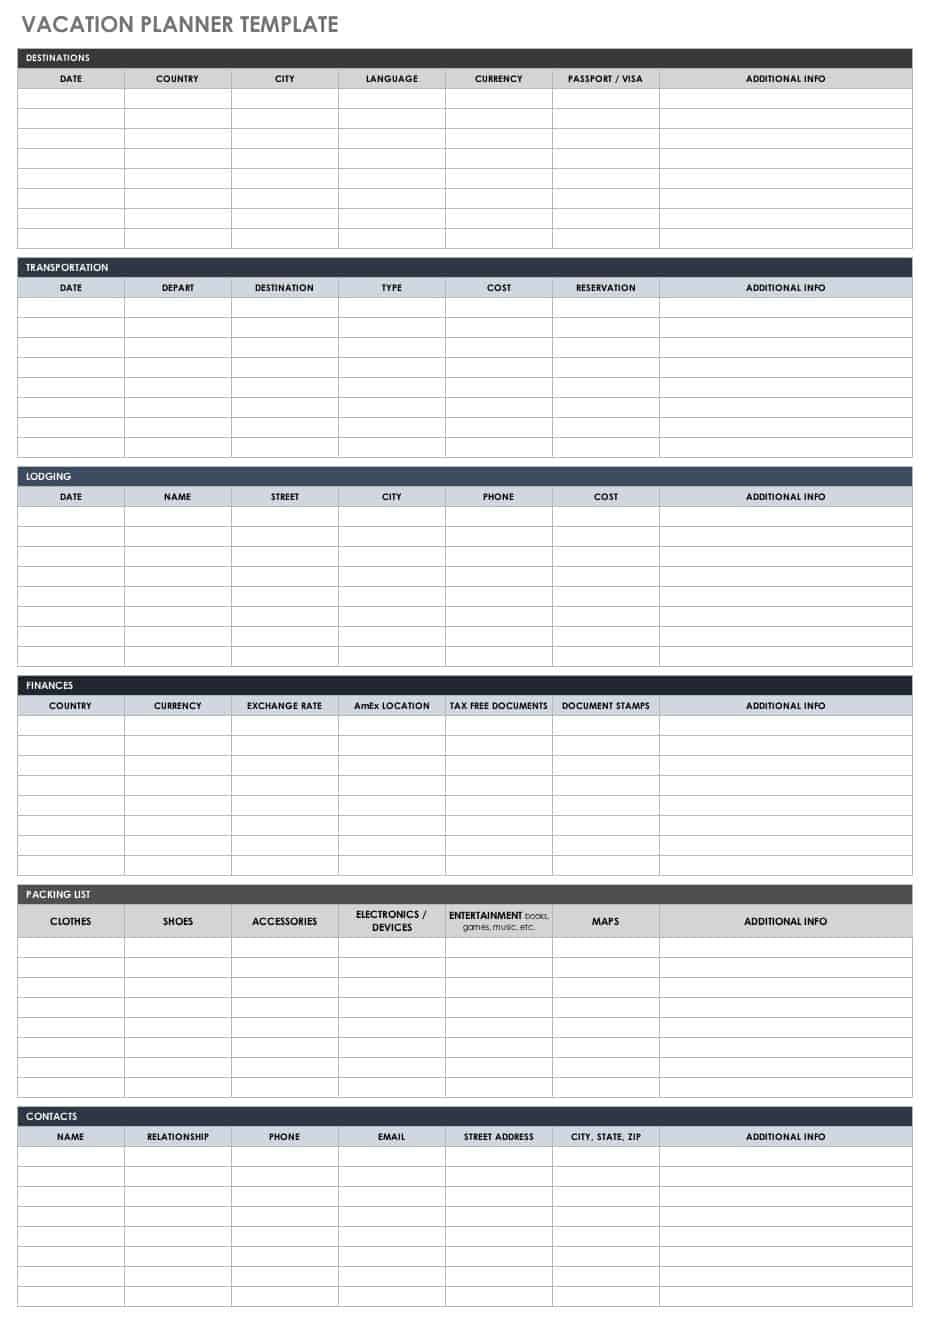 Free Itinerary Templates  Smartsheet With Regard To Travel Planner Itinerary Template With Travel Planner Itinerary Template